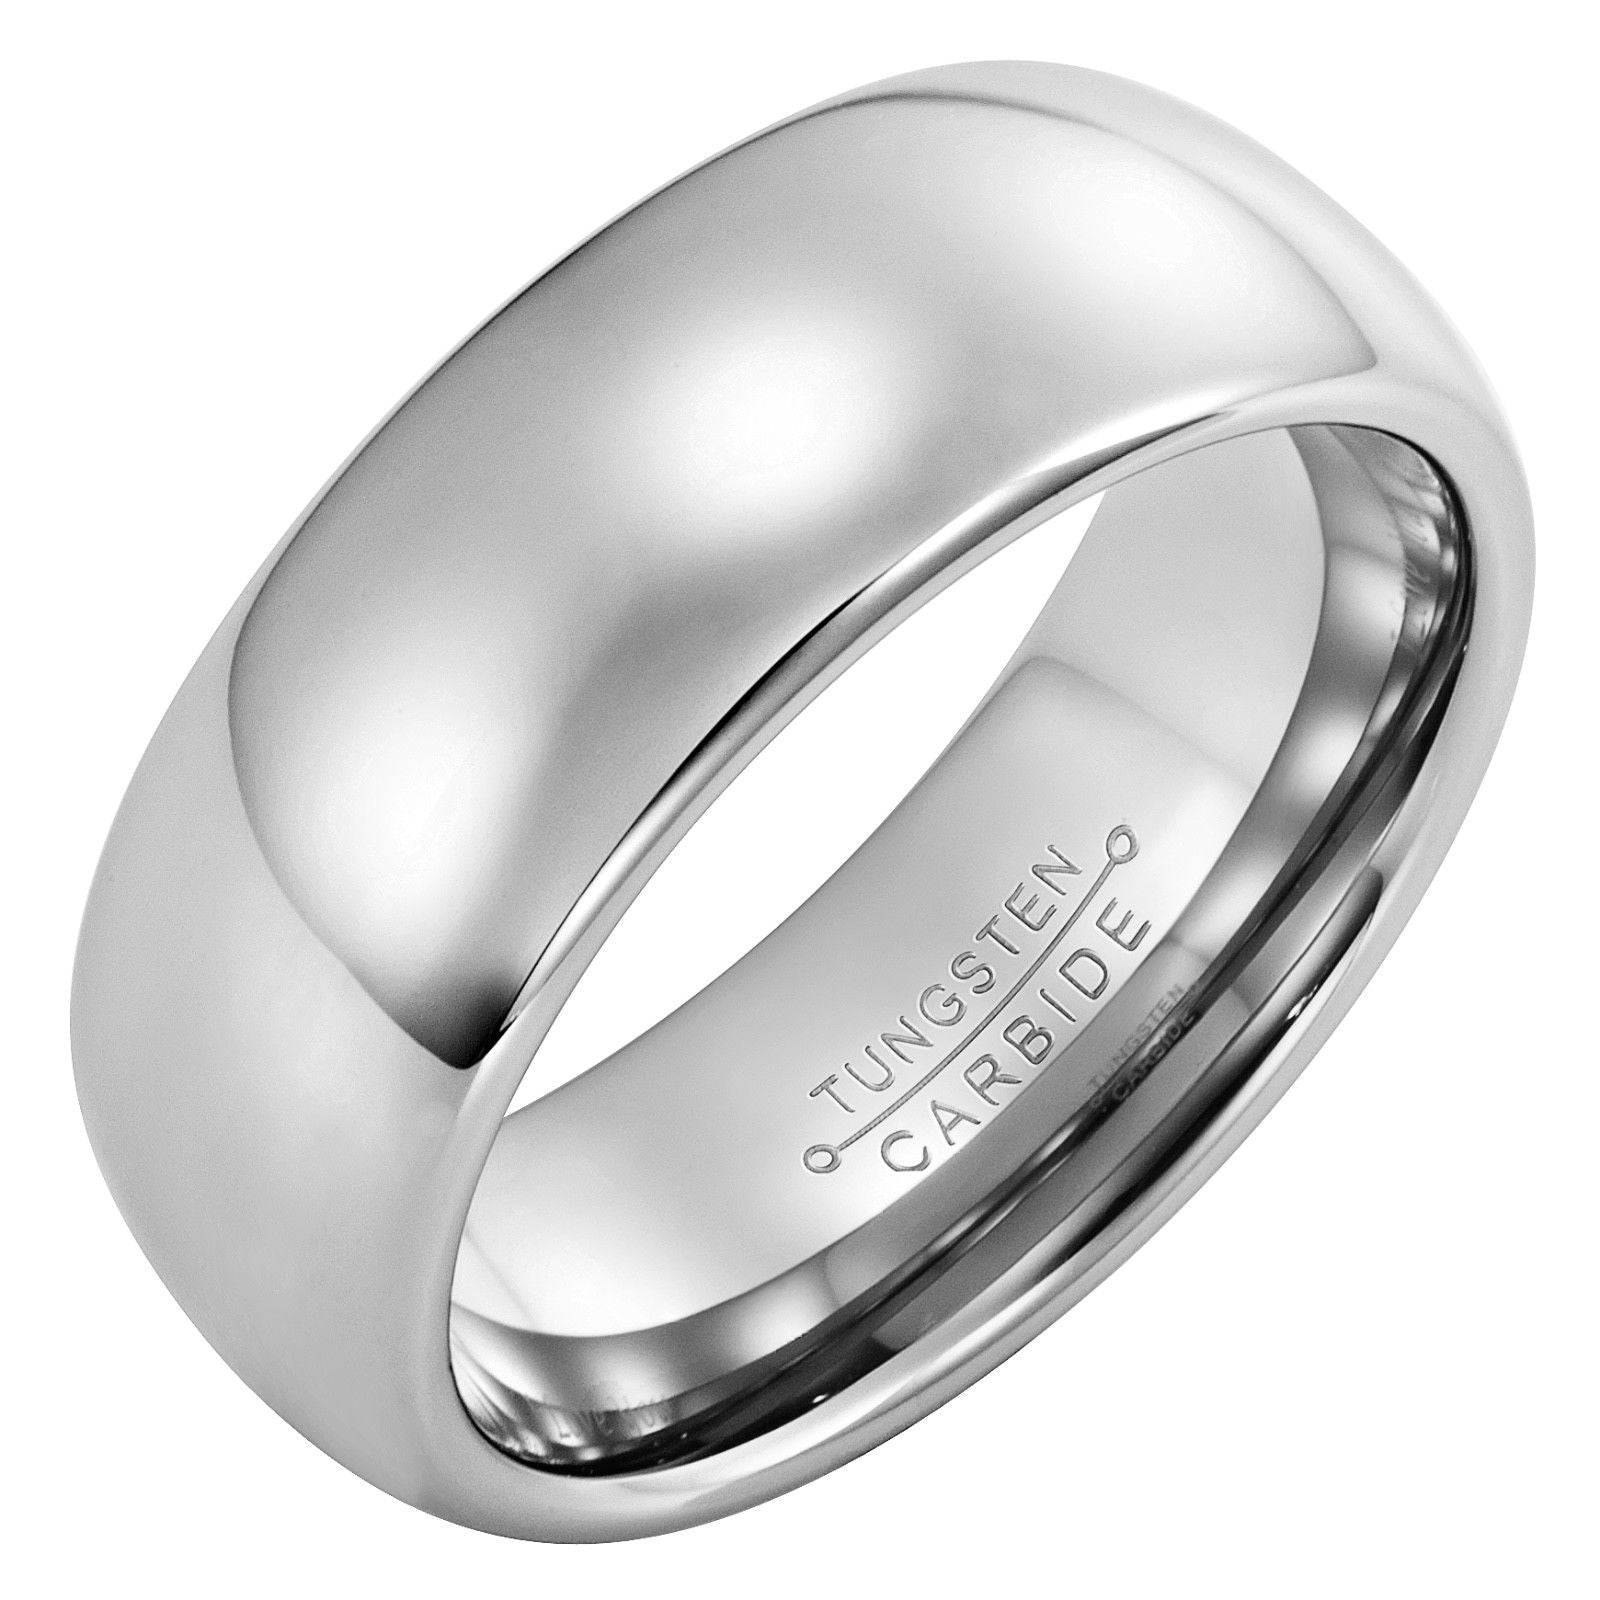 Mens 8mm Band Tungsten Ring Engraved I Love You By Willis Judd